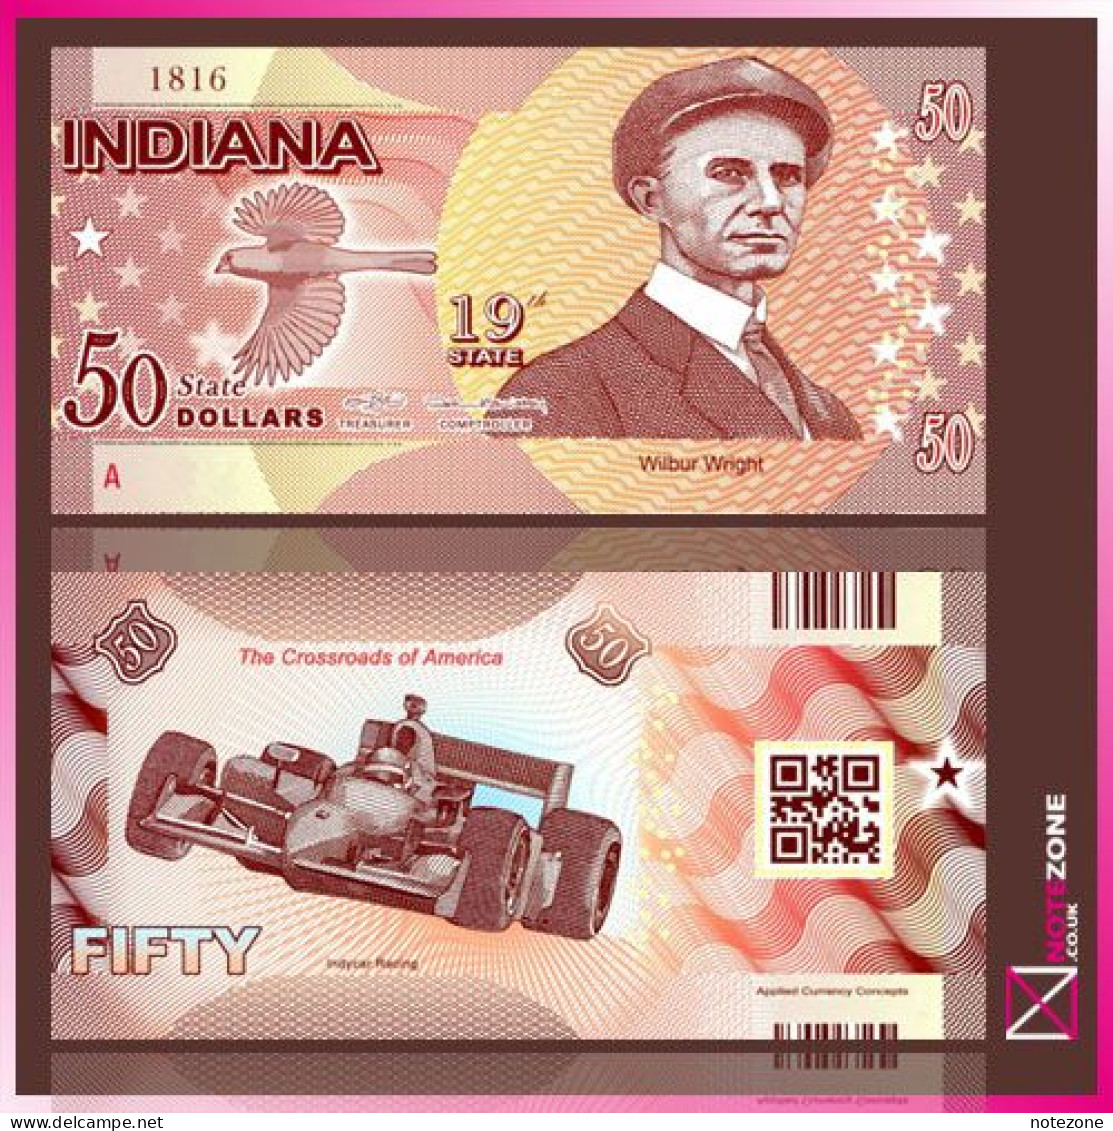 Thomas Stebbins USA $50 STATES Indiana 19th State Wilbur Wright Polymer Fantasy Private Banknote Note - Colecciones Lotes Mixtos